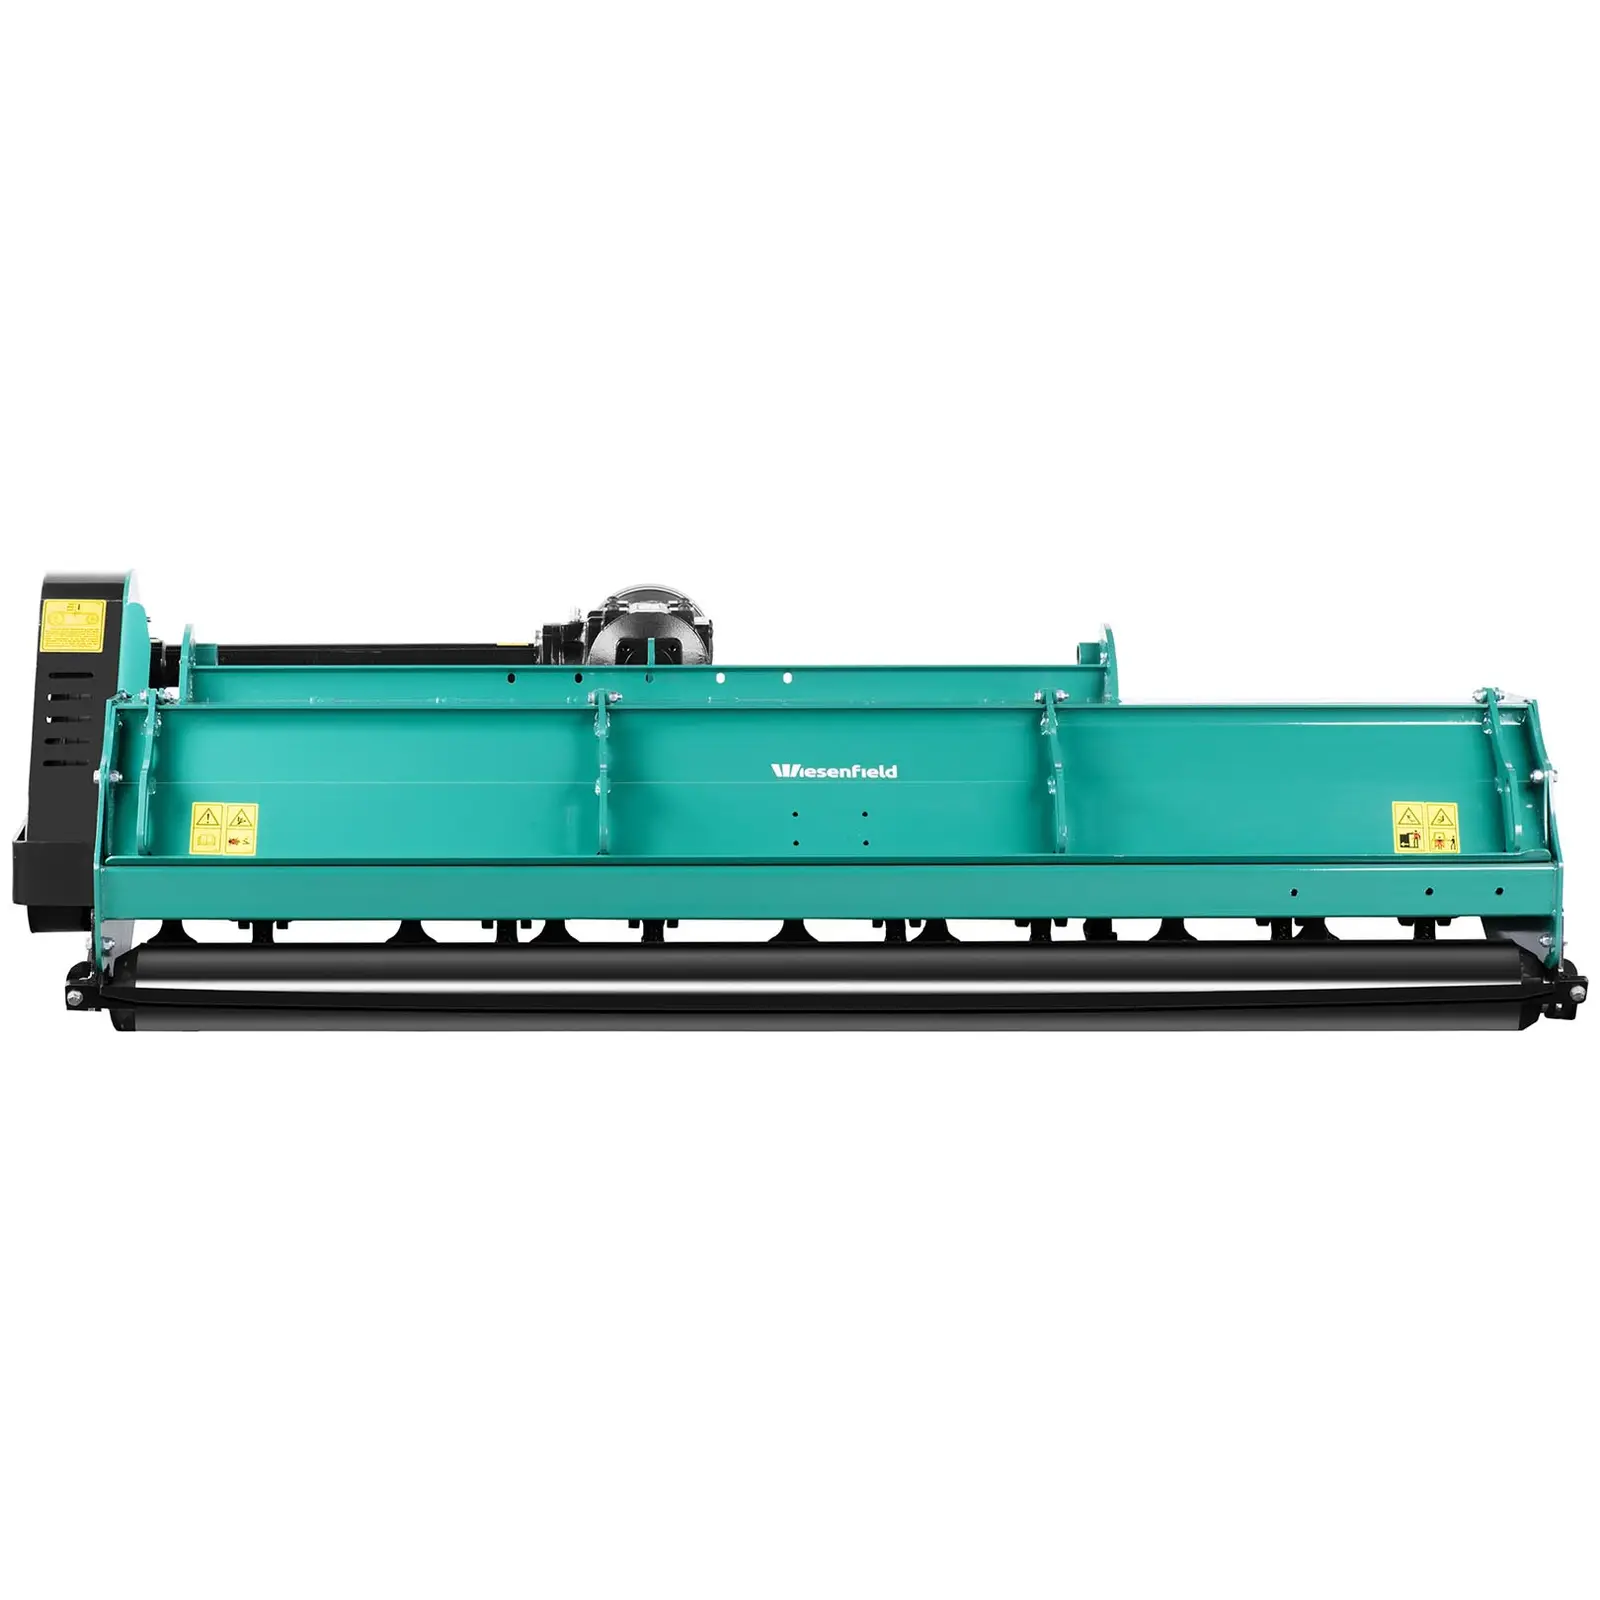 Flail mulcher - 215 cm working width - three-point linkage (cat. I / II) - self-cleaning roller